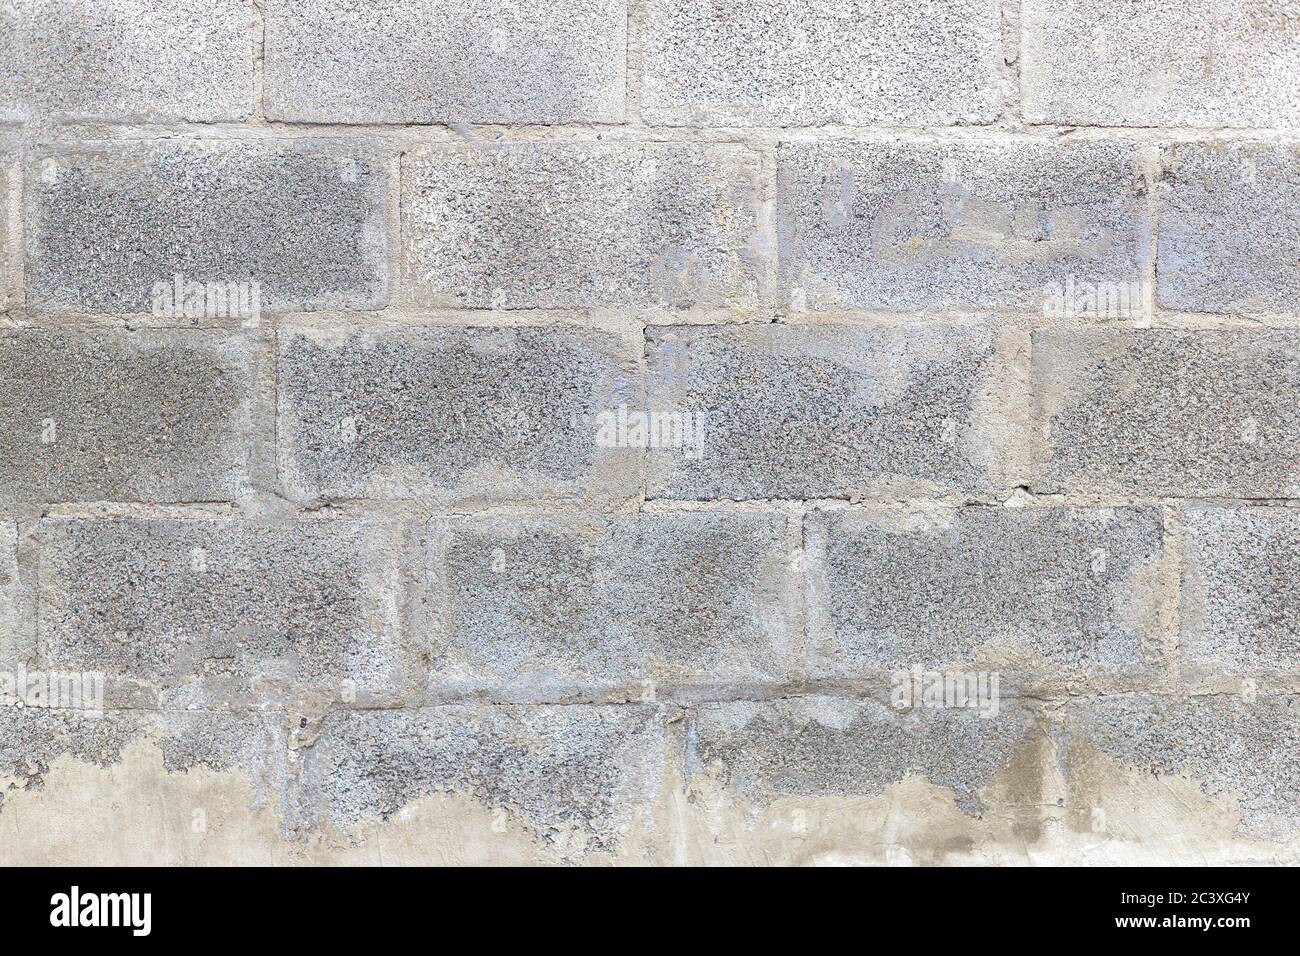 Texture and background of lightweight concrete block foamed. Raw material for industrial or house wall. Concept of construction, remodeling, renovatio Stock Photo